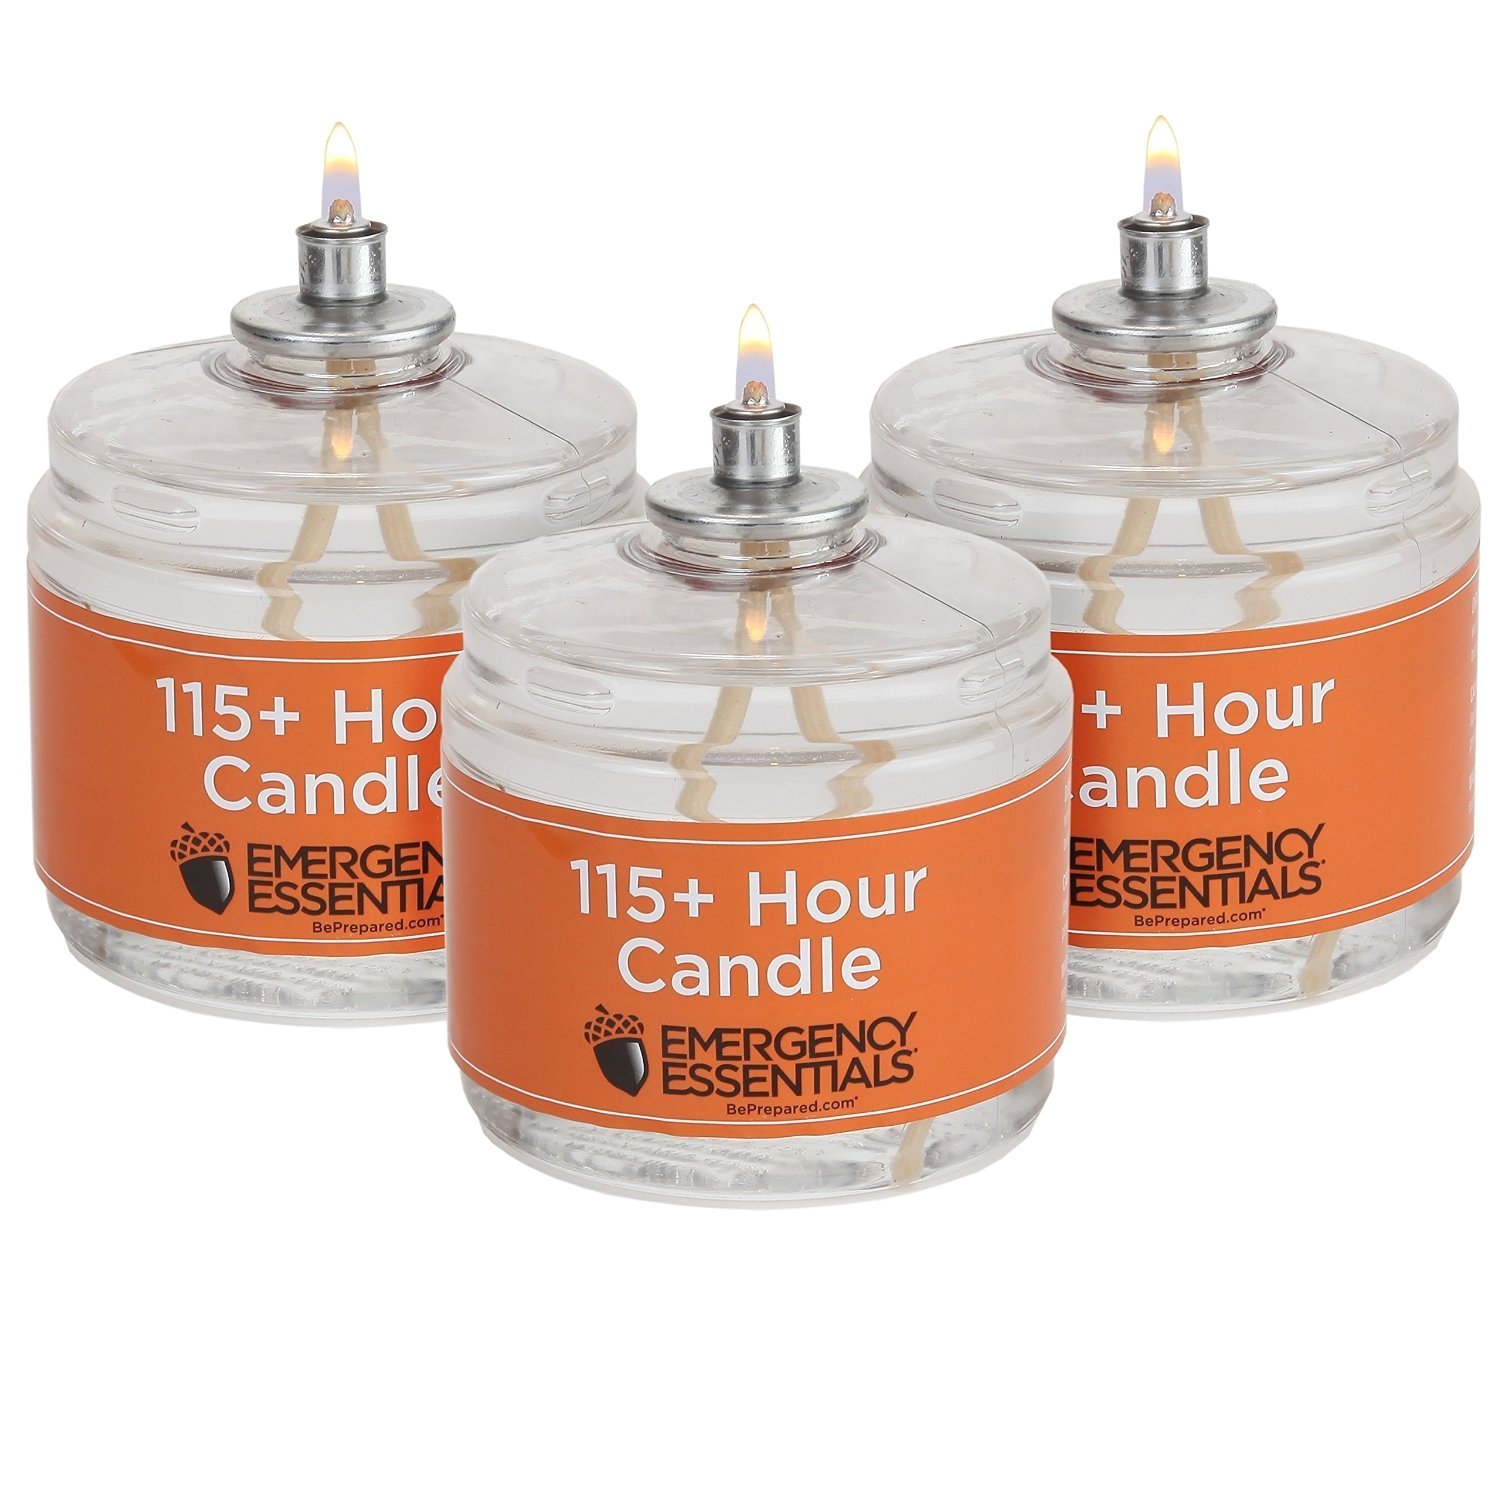 amazon com 115 hour plus emergency candles clear mist set of 3 long burning survival candles home kitchen